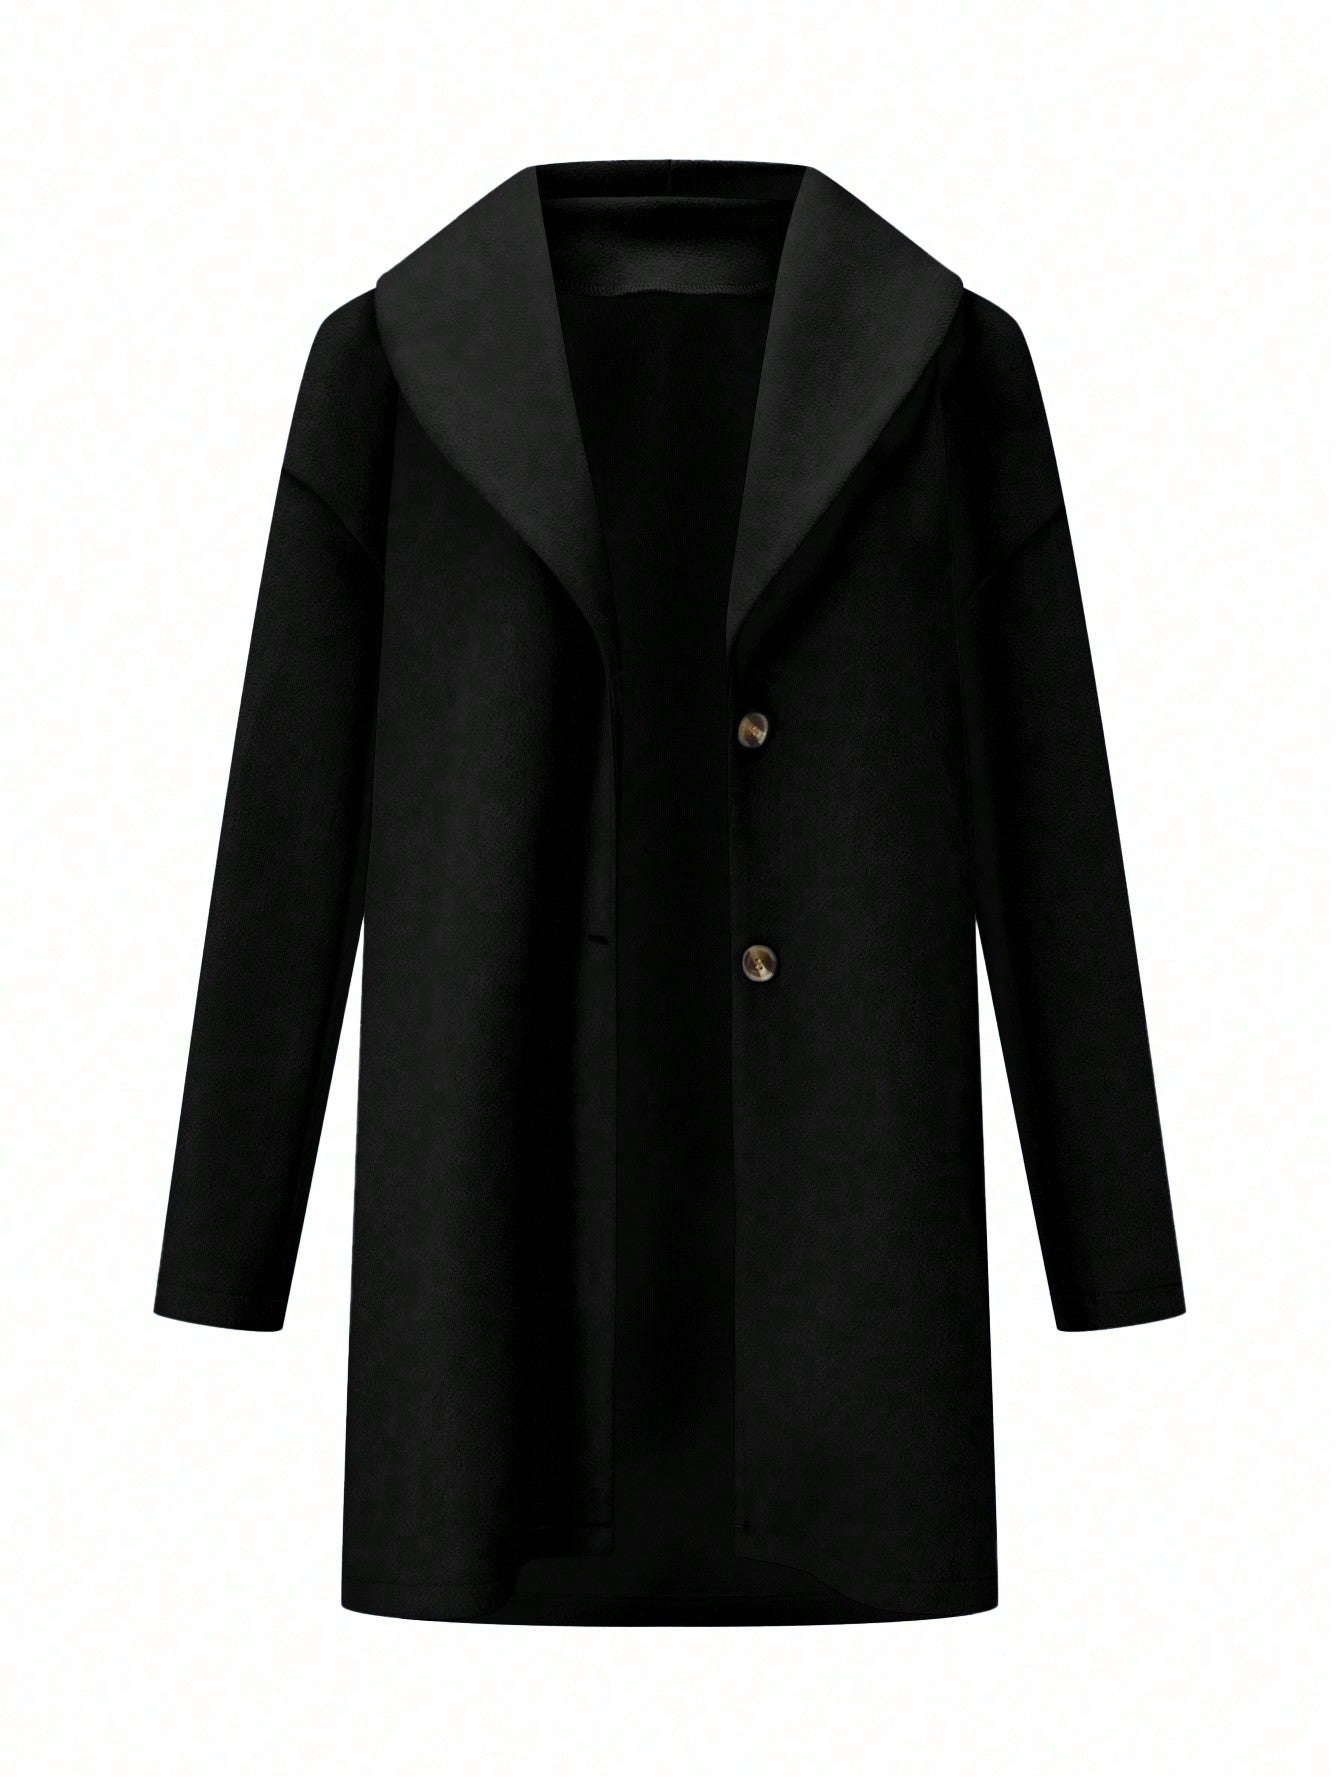 Women's Single-Breasted Oversized Woolen Coat With Drop Shoulder And Long Sleeves